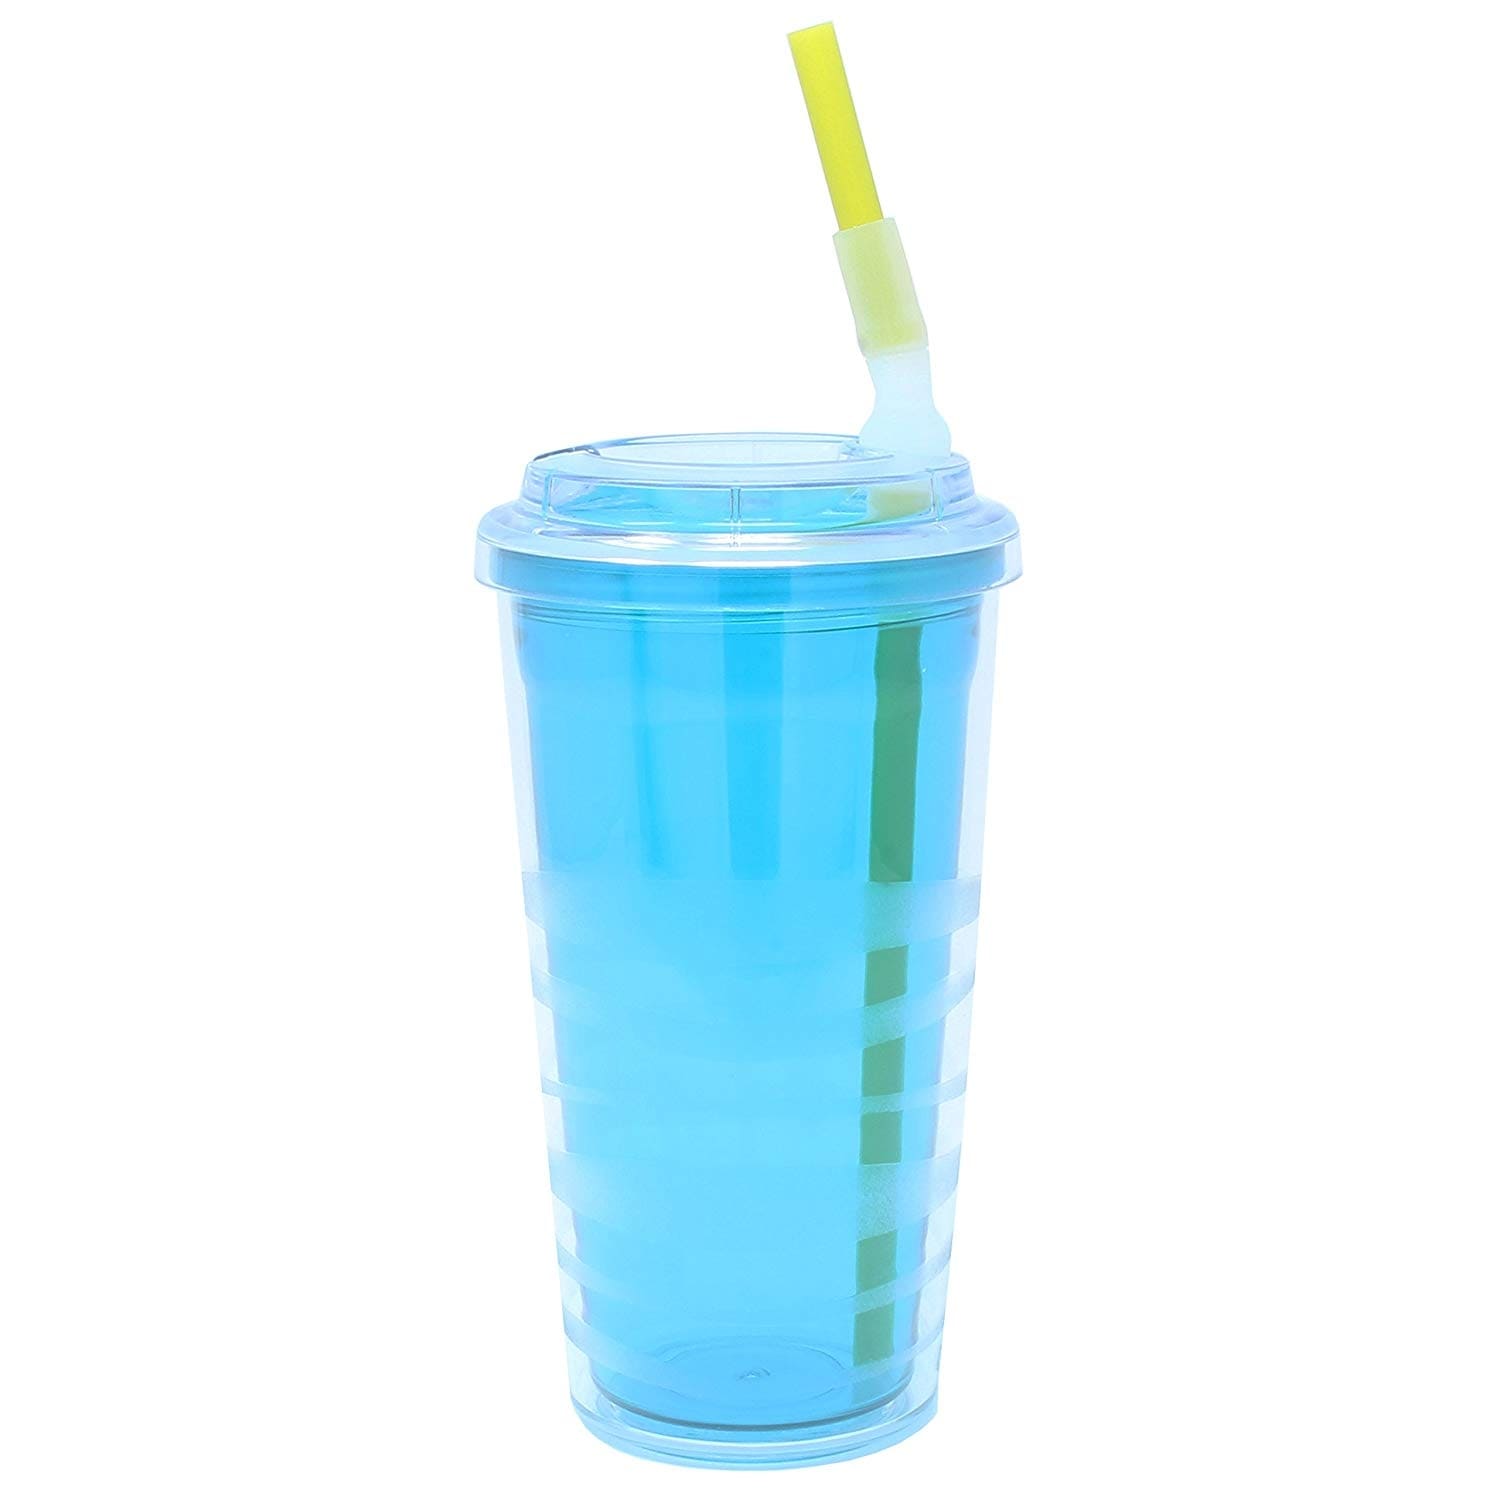 https://ak1.ostkcdn.com/images/products/is/images/direct/beb5d5dfdf19704c376def1eec67bd0c35f1ca9b/Copco-Lock-N-Roll-Tumbler-With-Flip-Up-Straw---Spill-Proof%2C-Double-Wall-Insulation%2C-BPA-Free-16-Oz---Teal-Blue.jpg